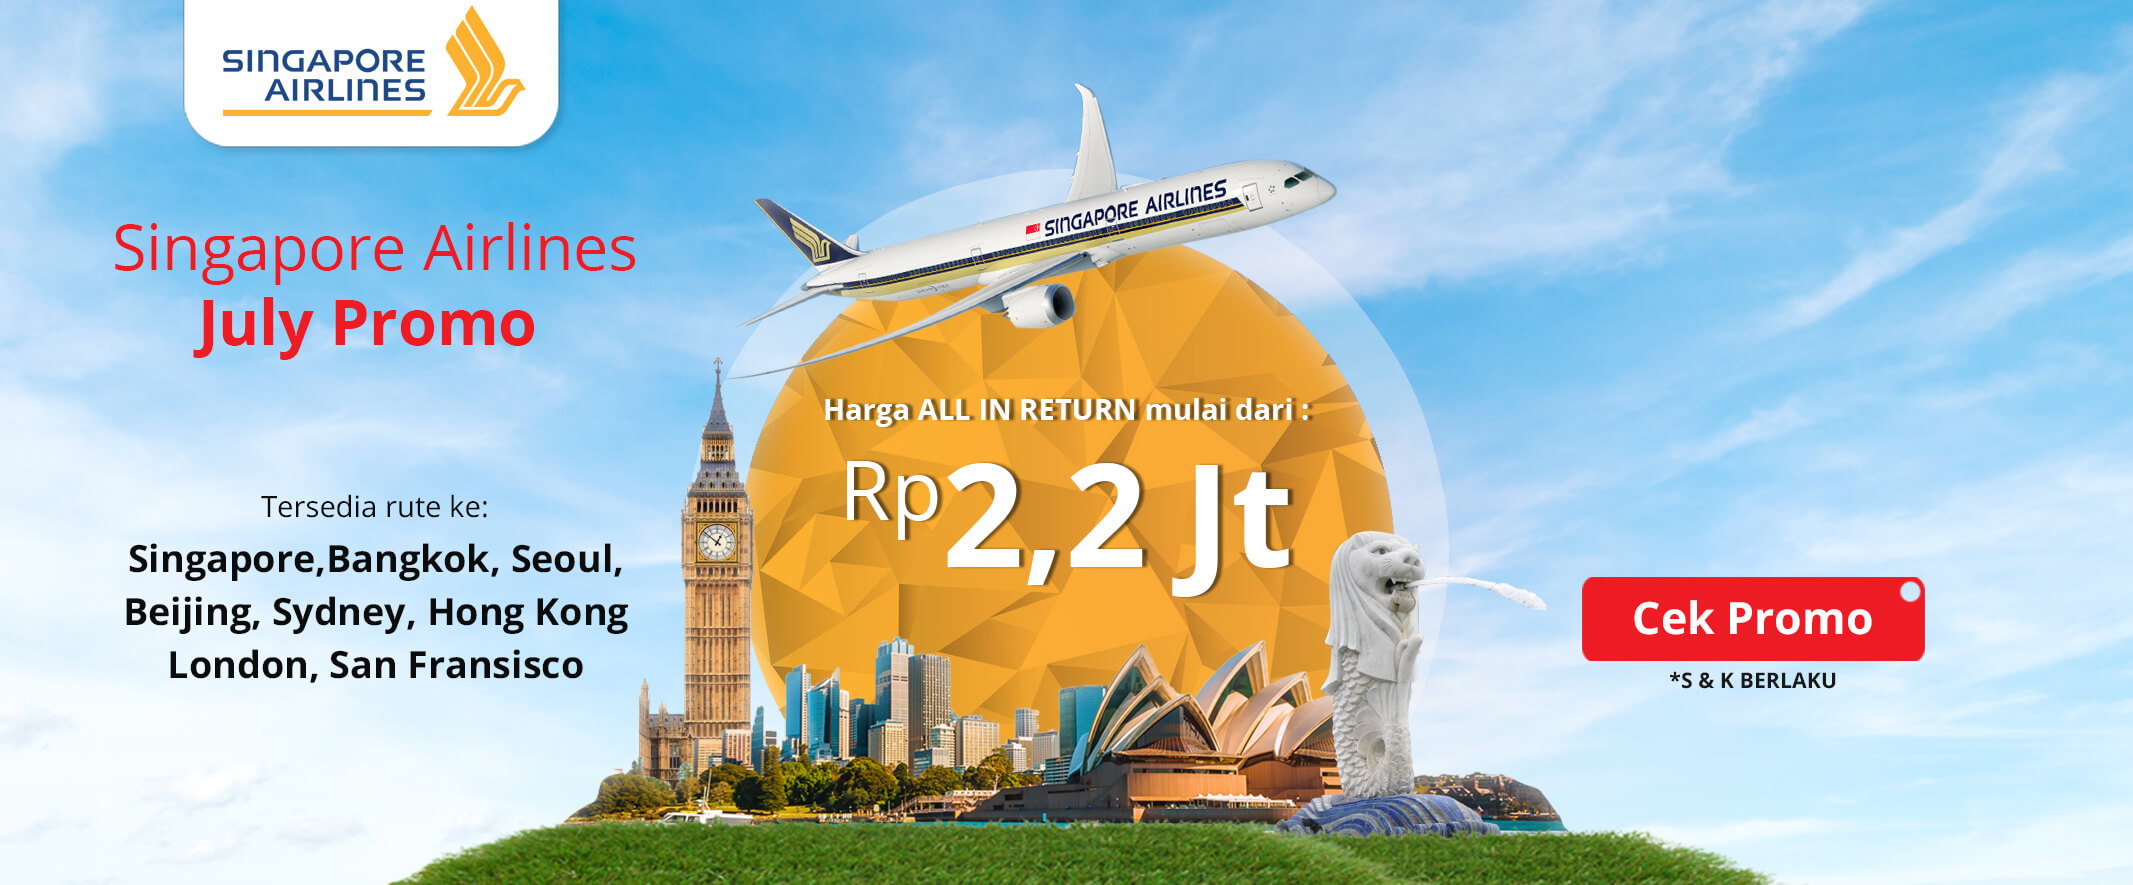 Singapore Airlines July Promo 2019